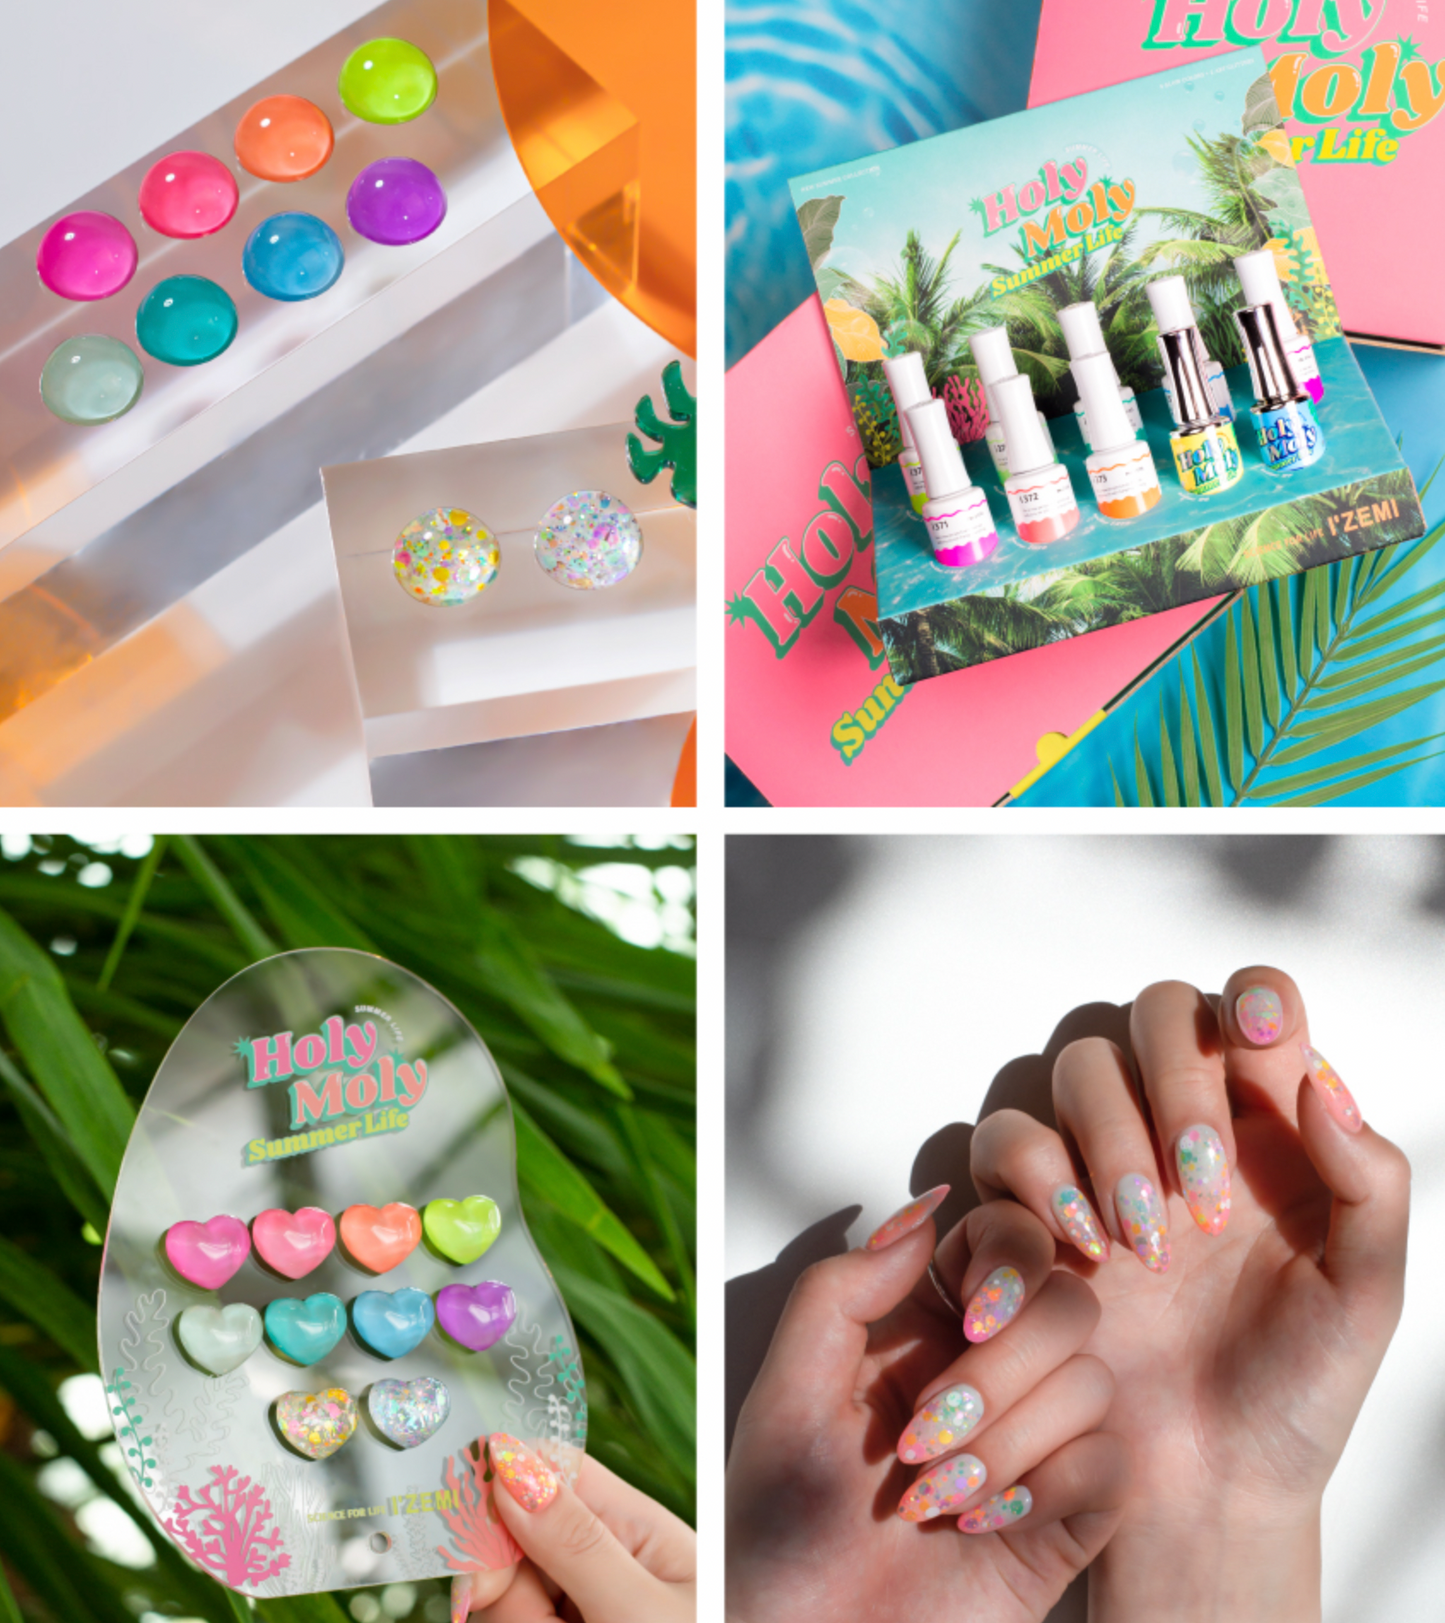 Holy Moly Summer Life 10pc collection - limited edition packaging